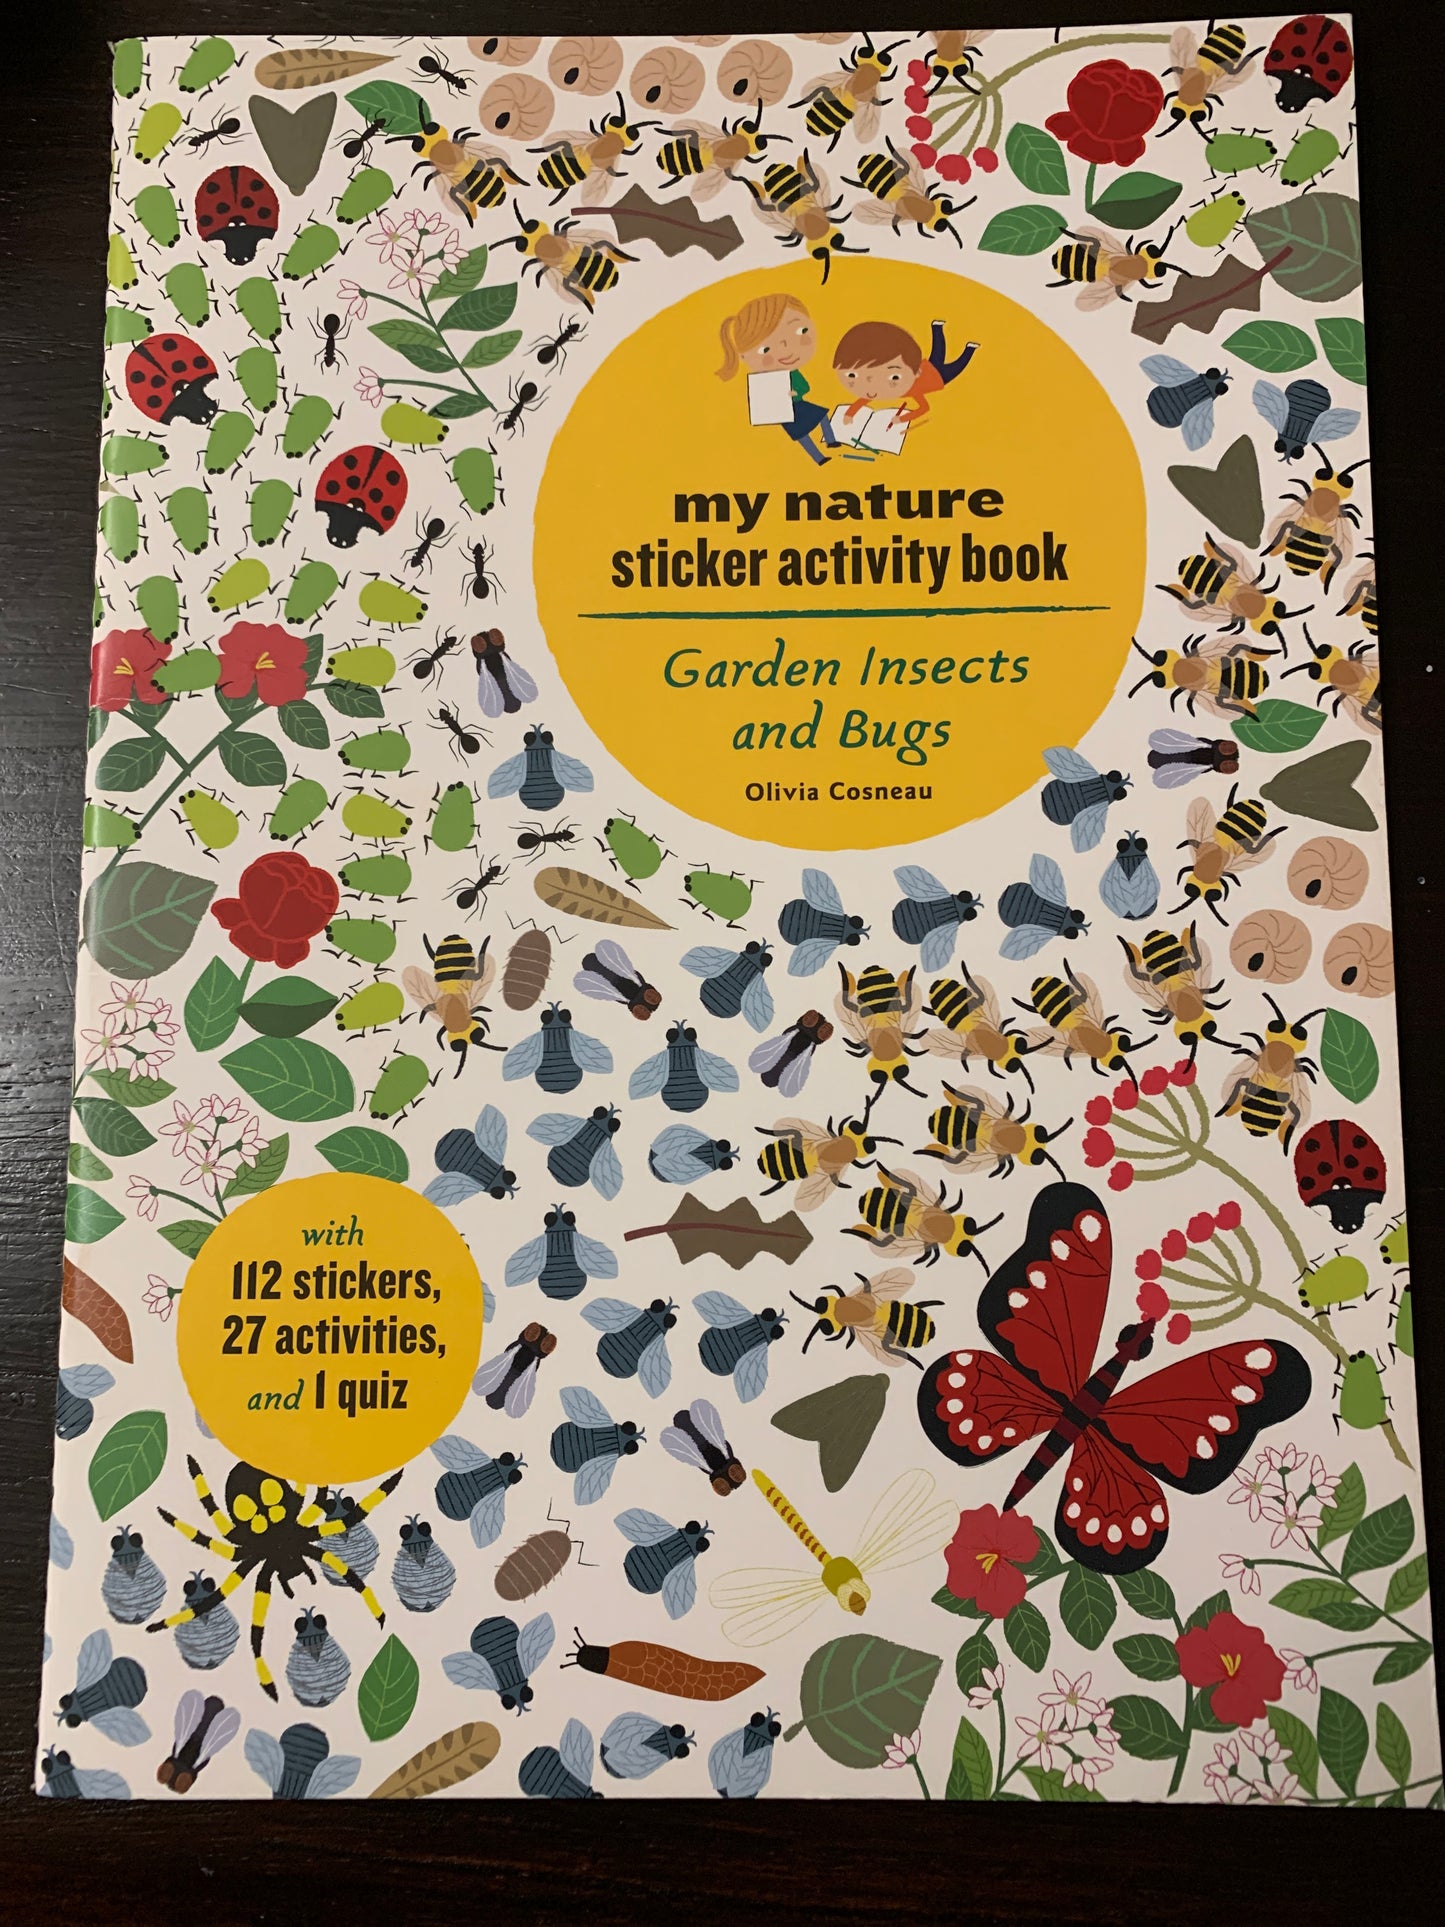 My Nature Sticker Activity Book: Garden Insects and Bugs